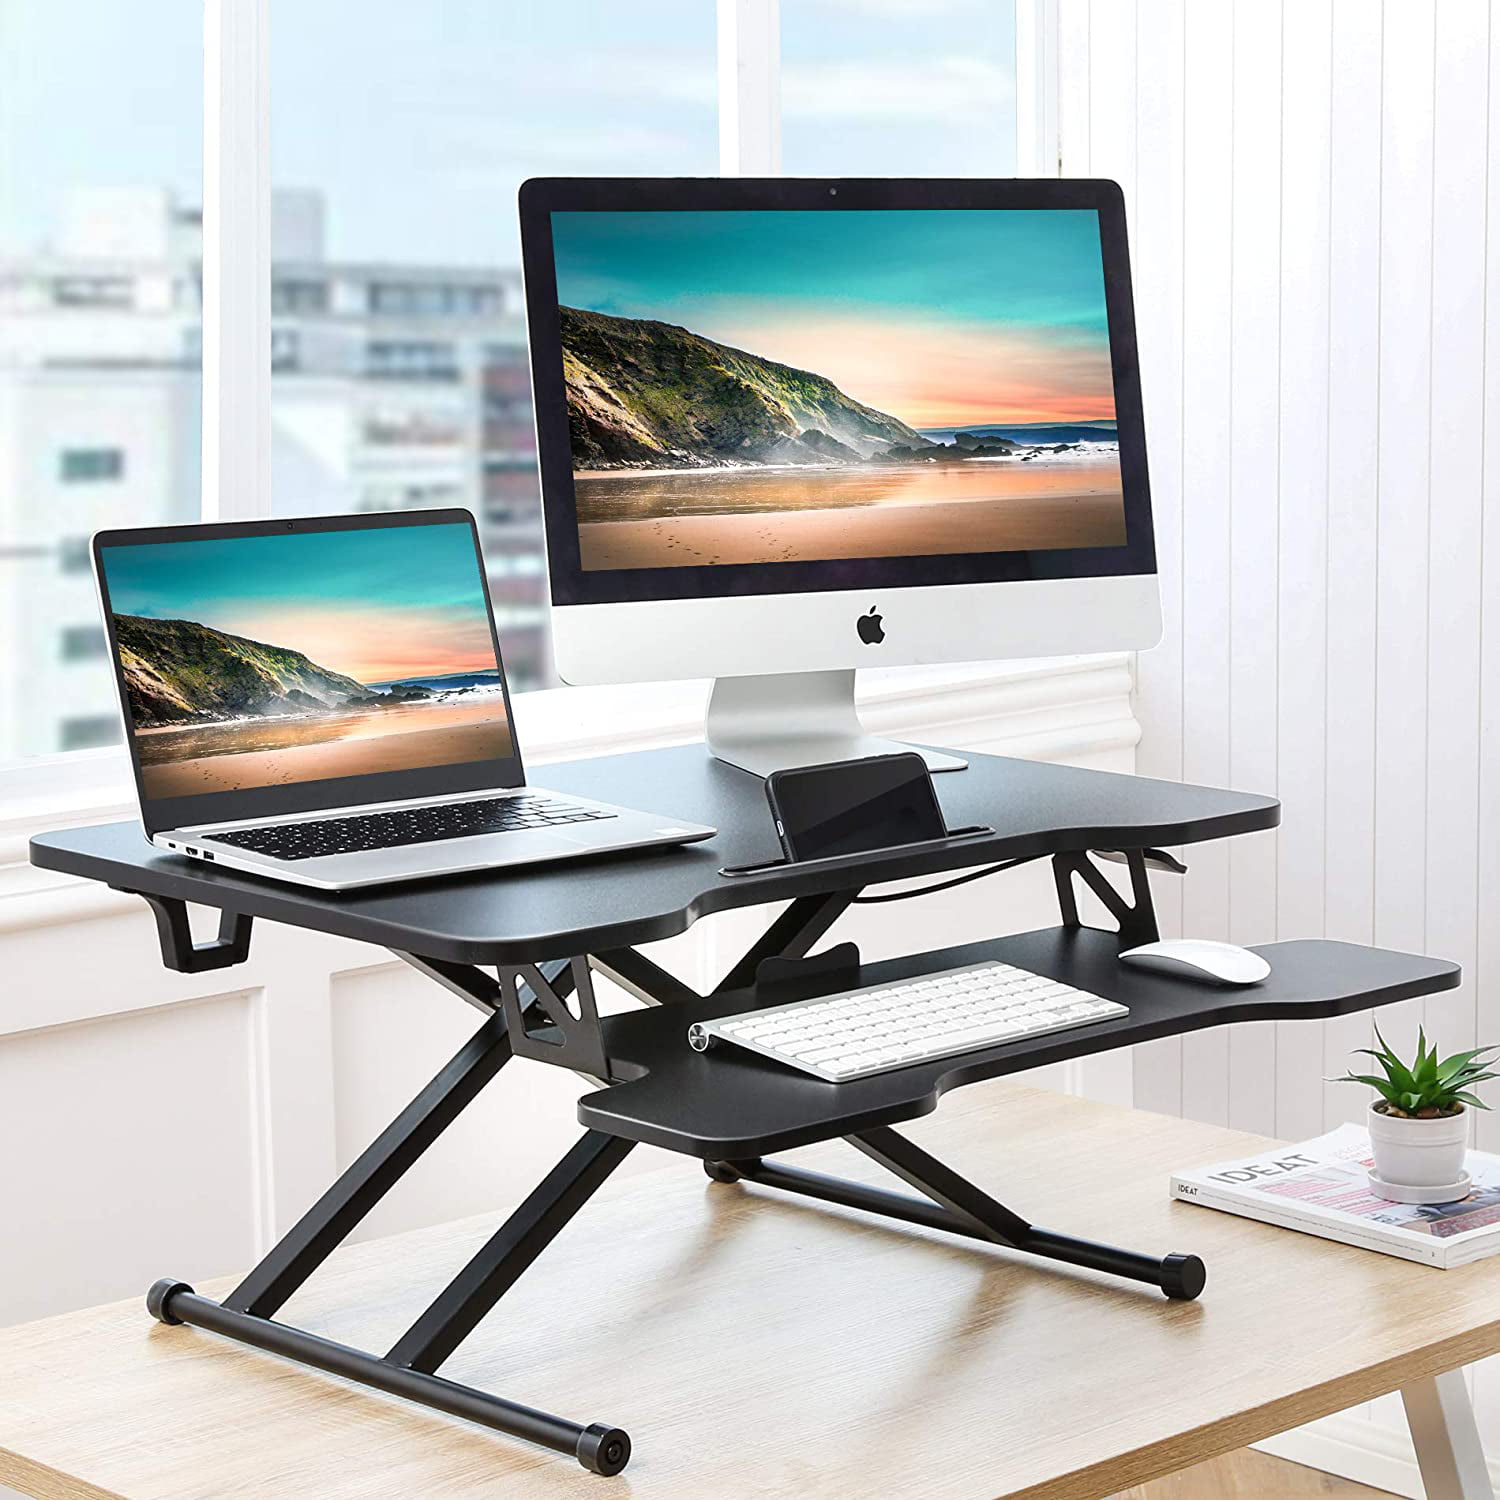 FITUEYES Standing Desk Converter Sit to Stand Up Desk Tabletop Workstation 31 Inch Wide Platform with Keyboard Tray SD108002MB 